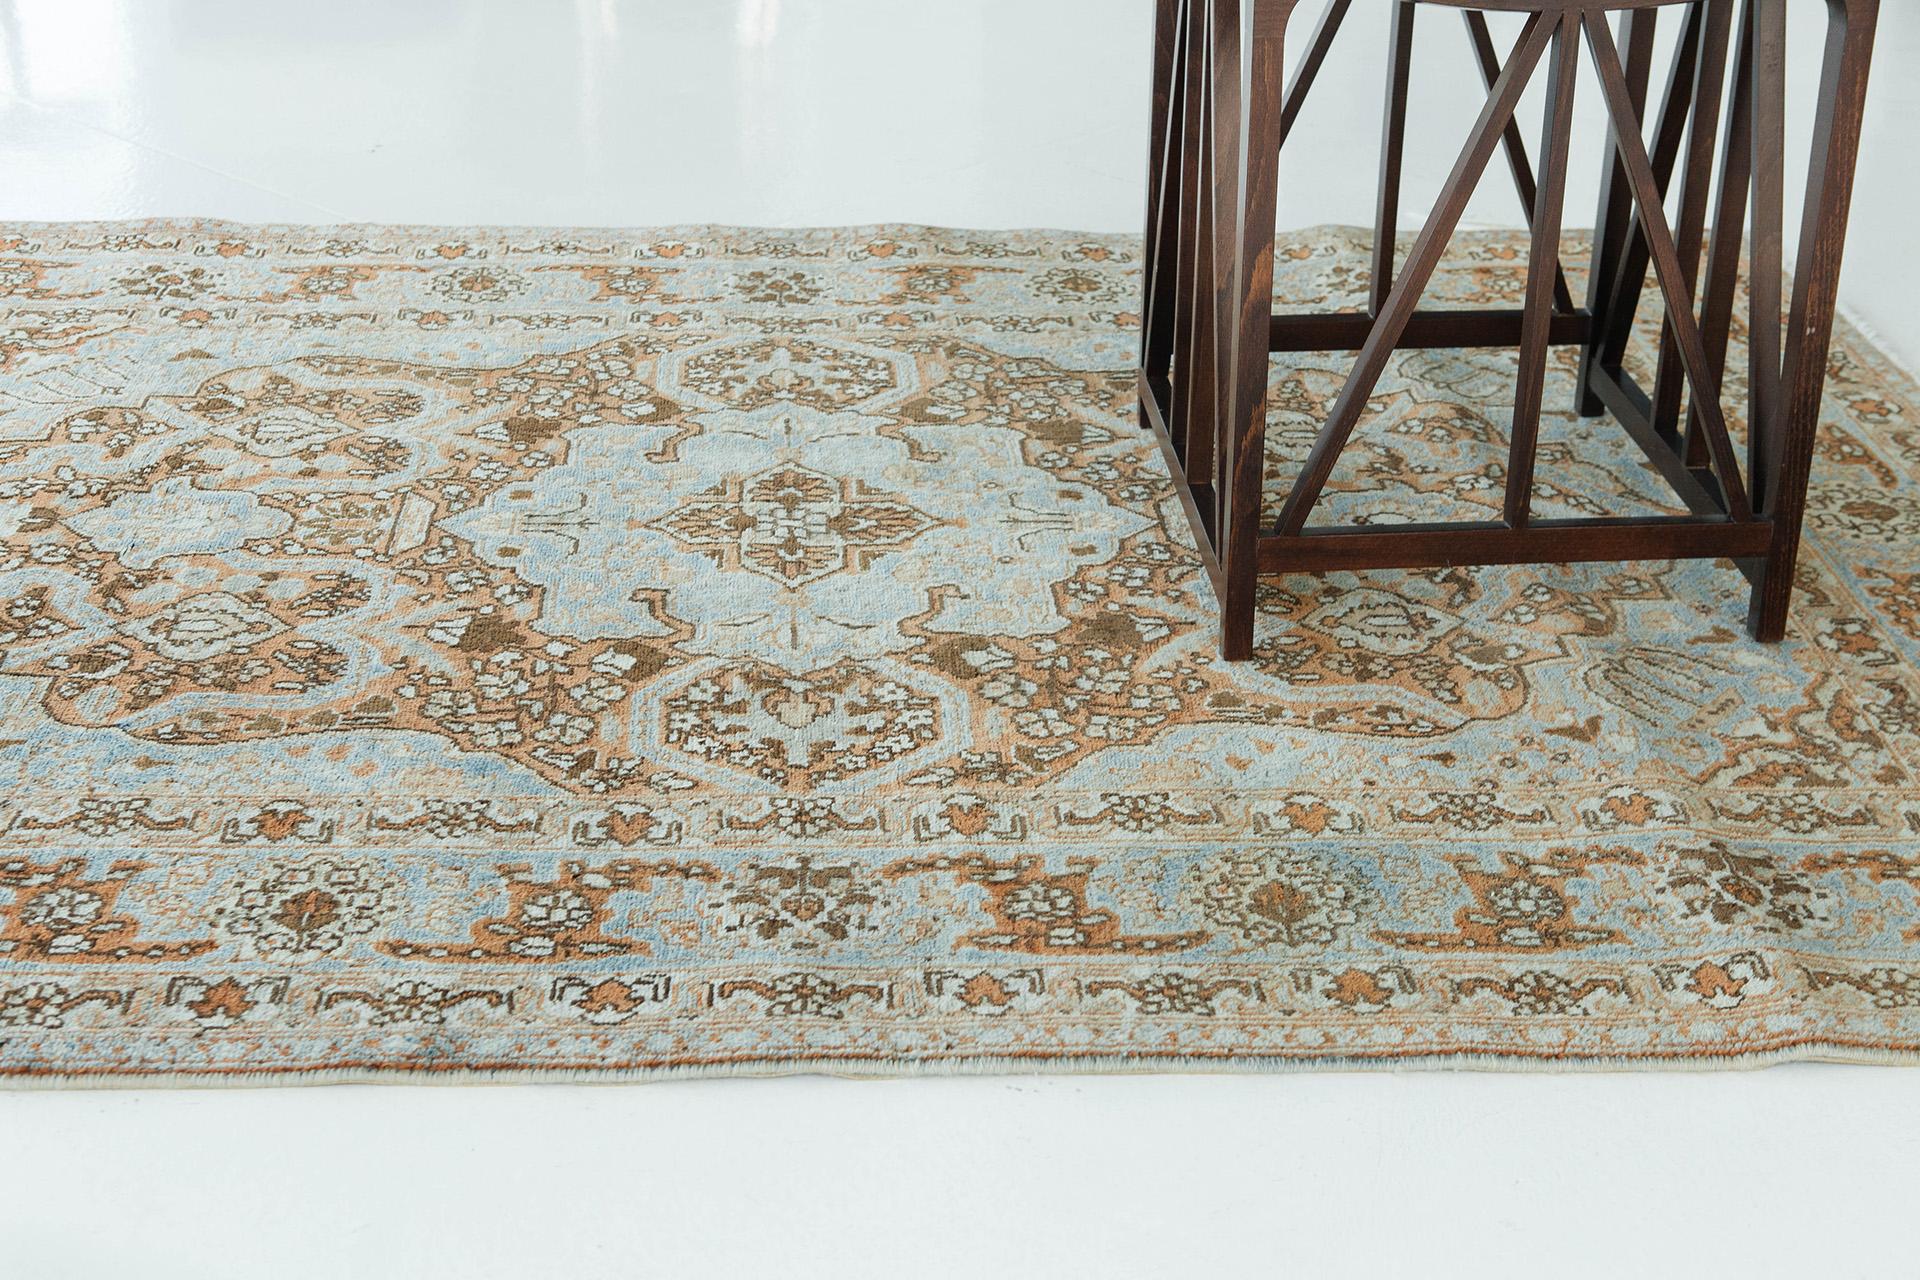 An interplay of terracotta and azure blue establish the base tones in this stunning vintage Tabriz. Ivory and rich brown define motif elements throughout. The rug has an axial composition with a large lobed medallion and pendants in a field of